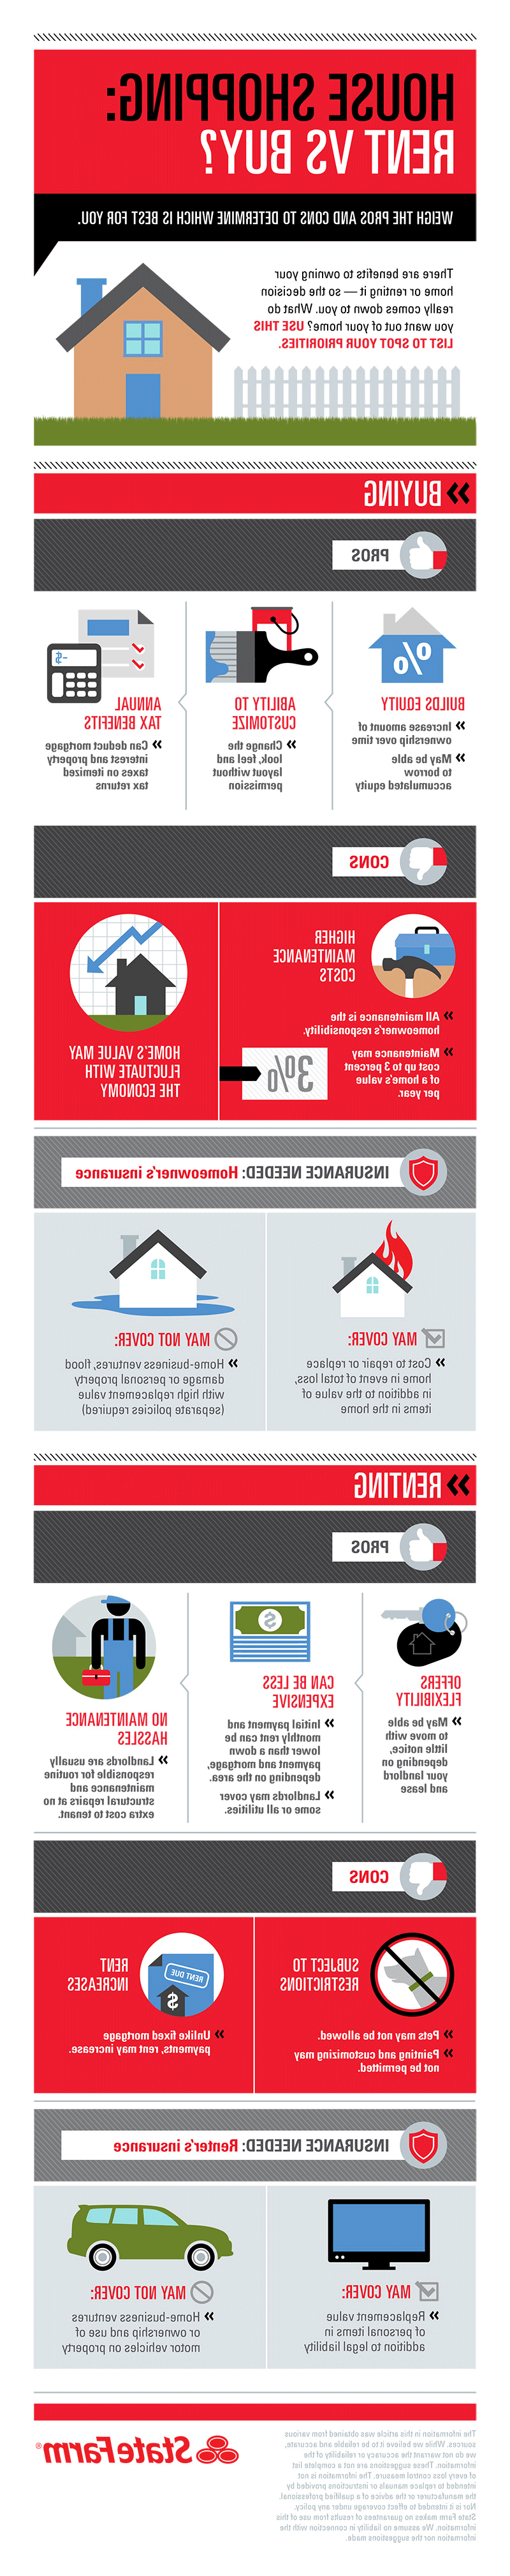 Infographic showing common pros and cons for buying vs renting a home.